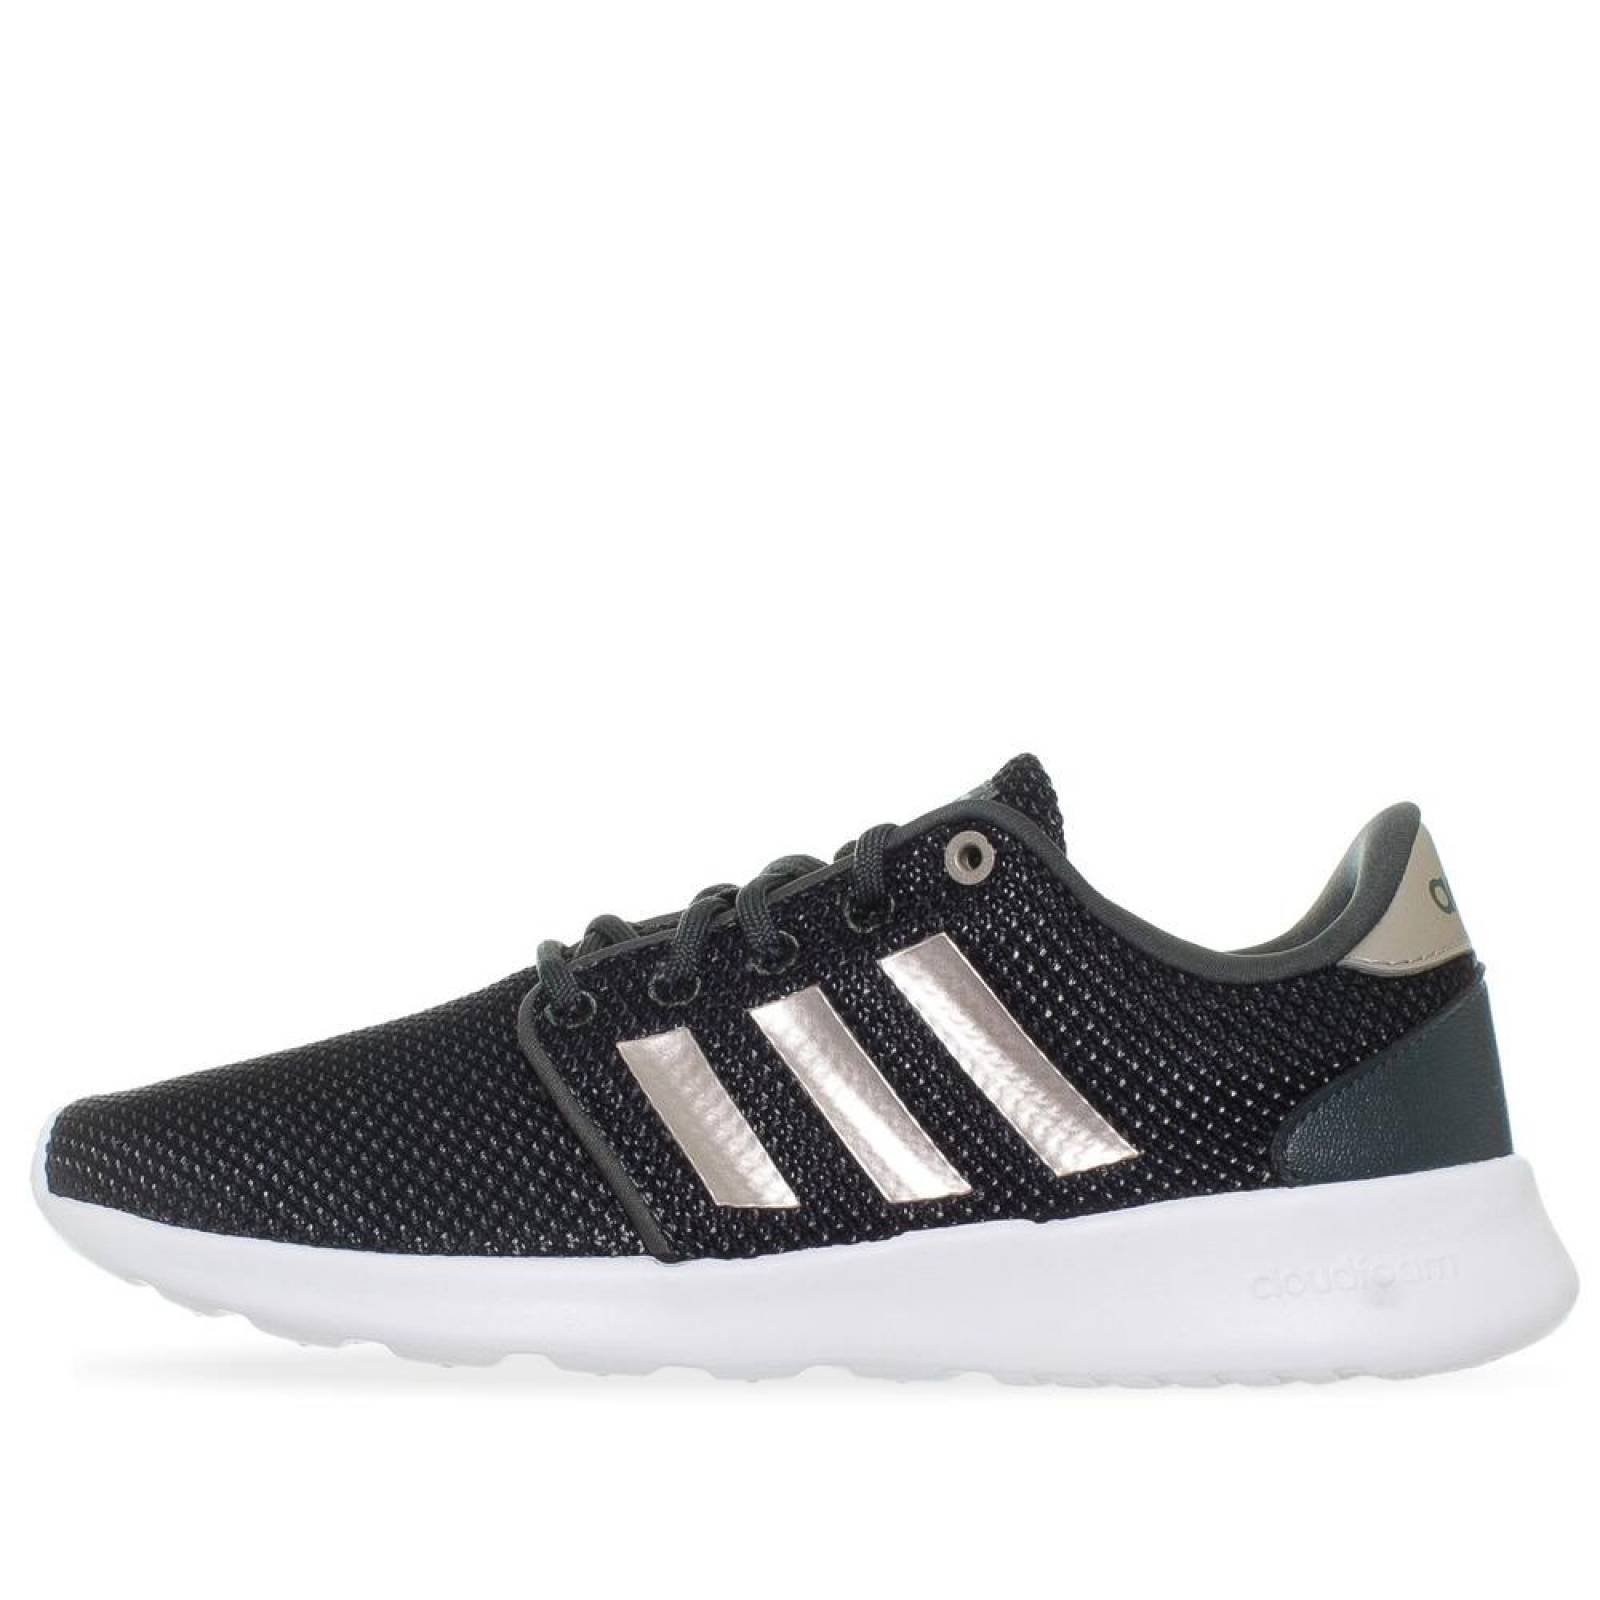 adidas qt racer mujer